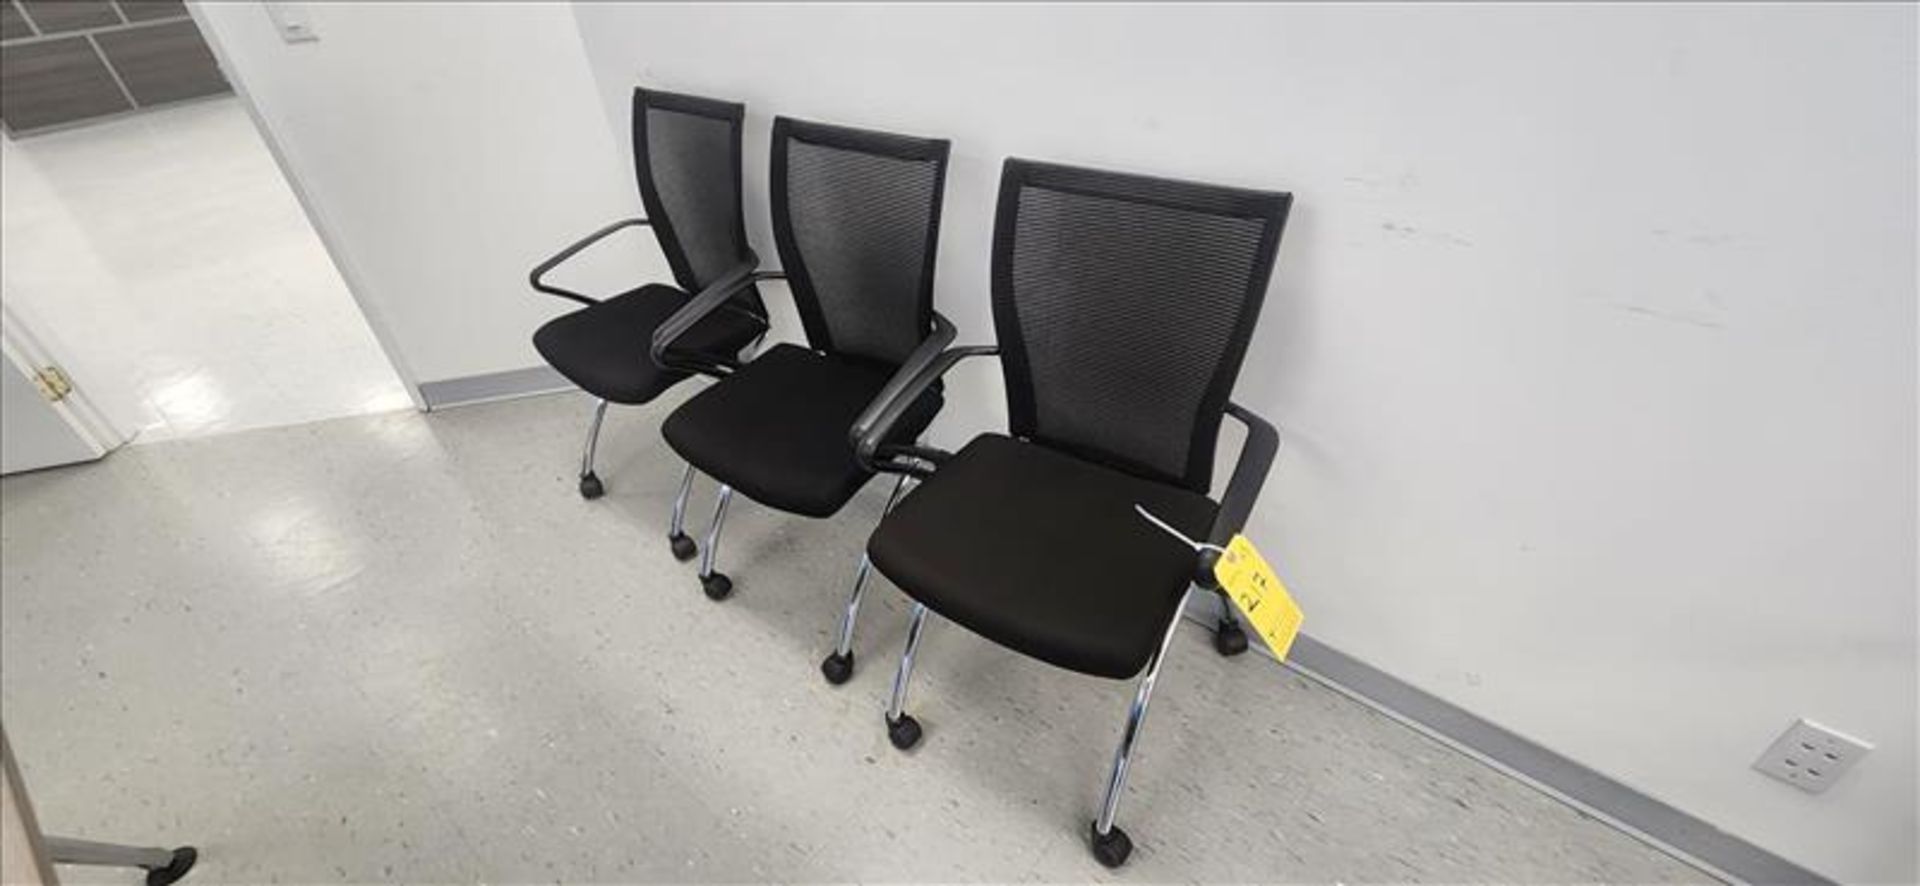 (3) Chairs w/ casters